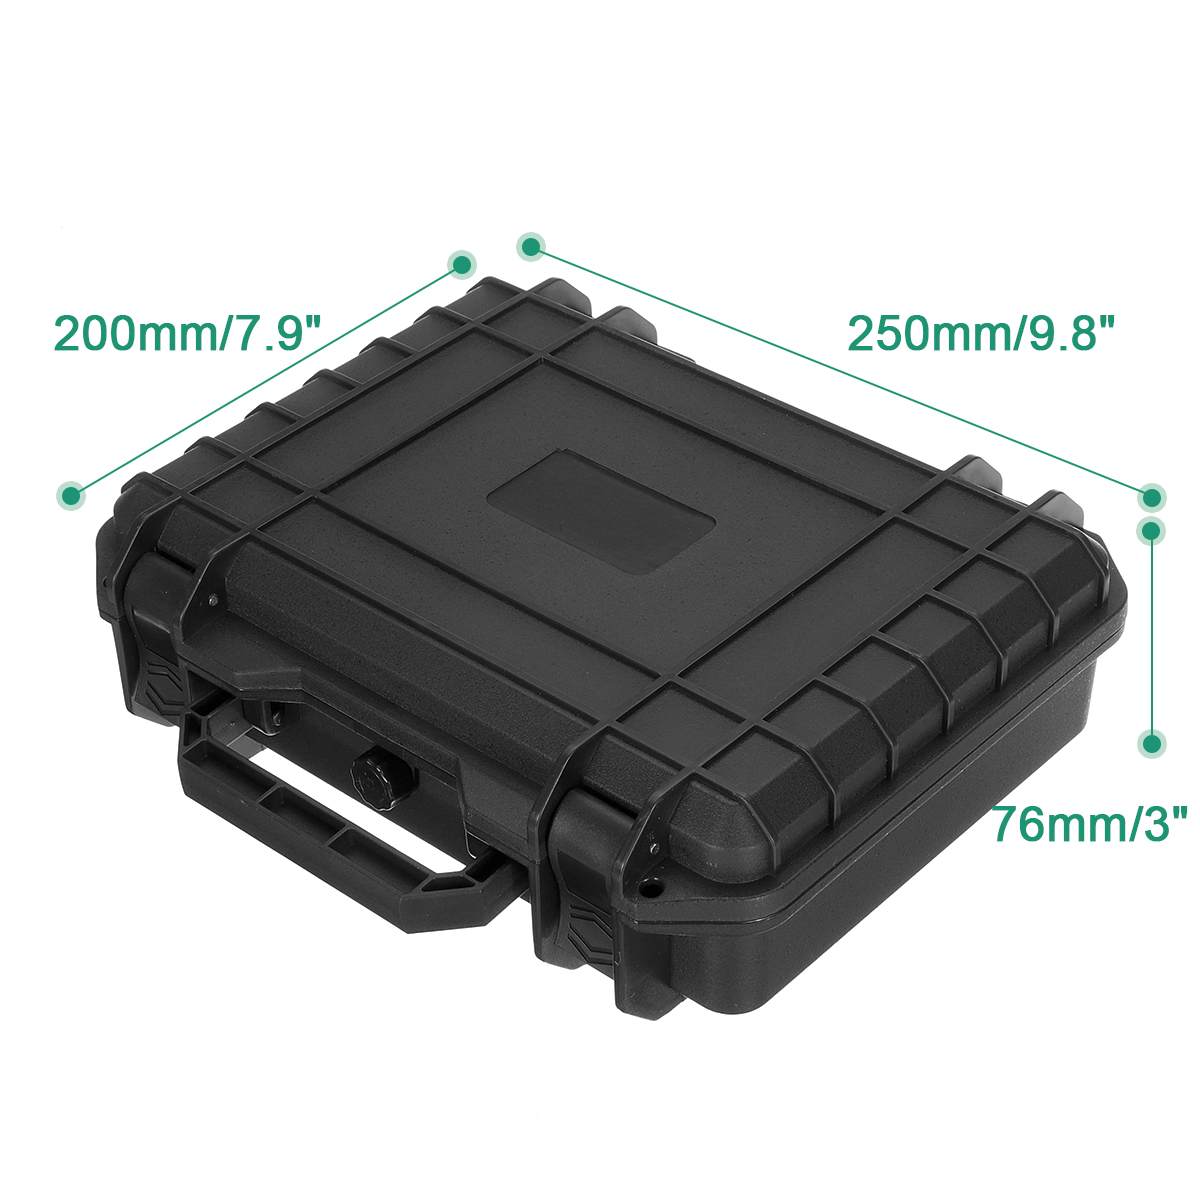 MG6235 Protective Safety Instrument Tool Box Waterproof Shockproof Storage Toolbox Sealed Tool Case Impact Resistant Suitcase